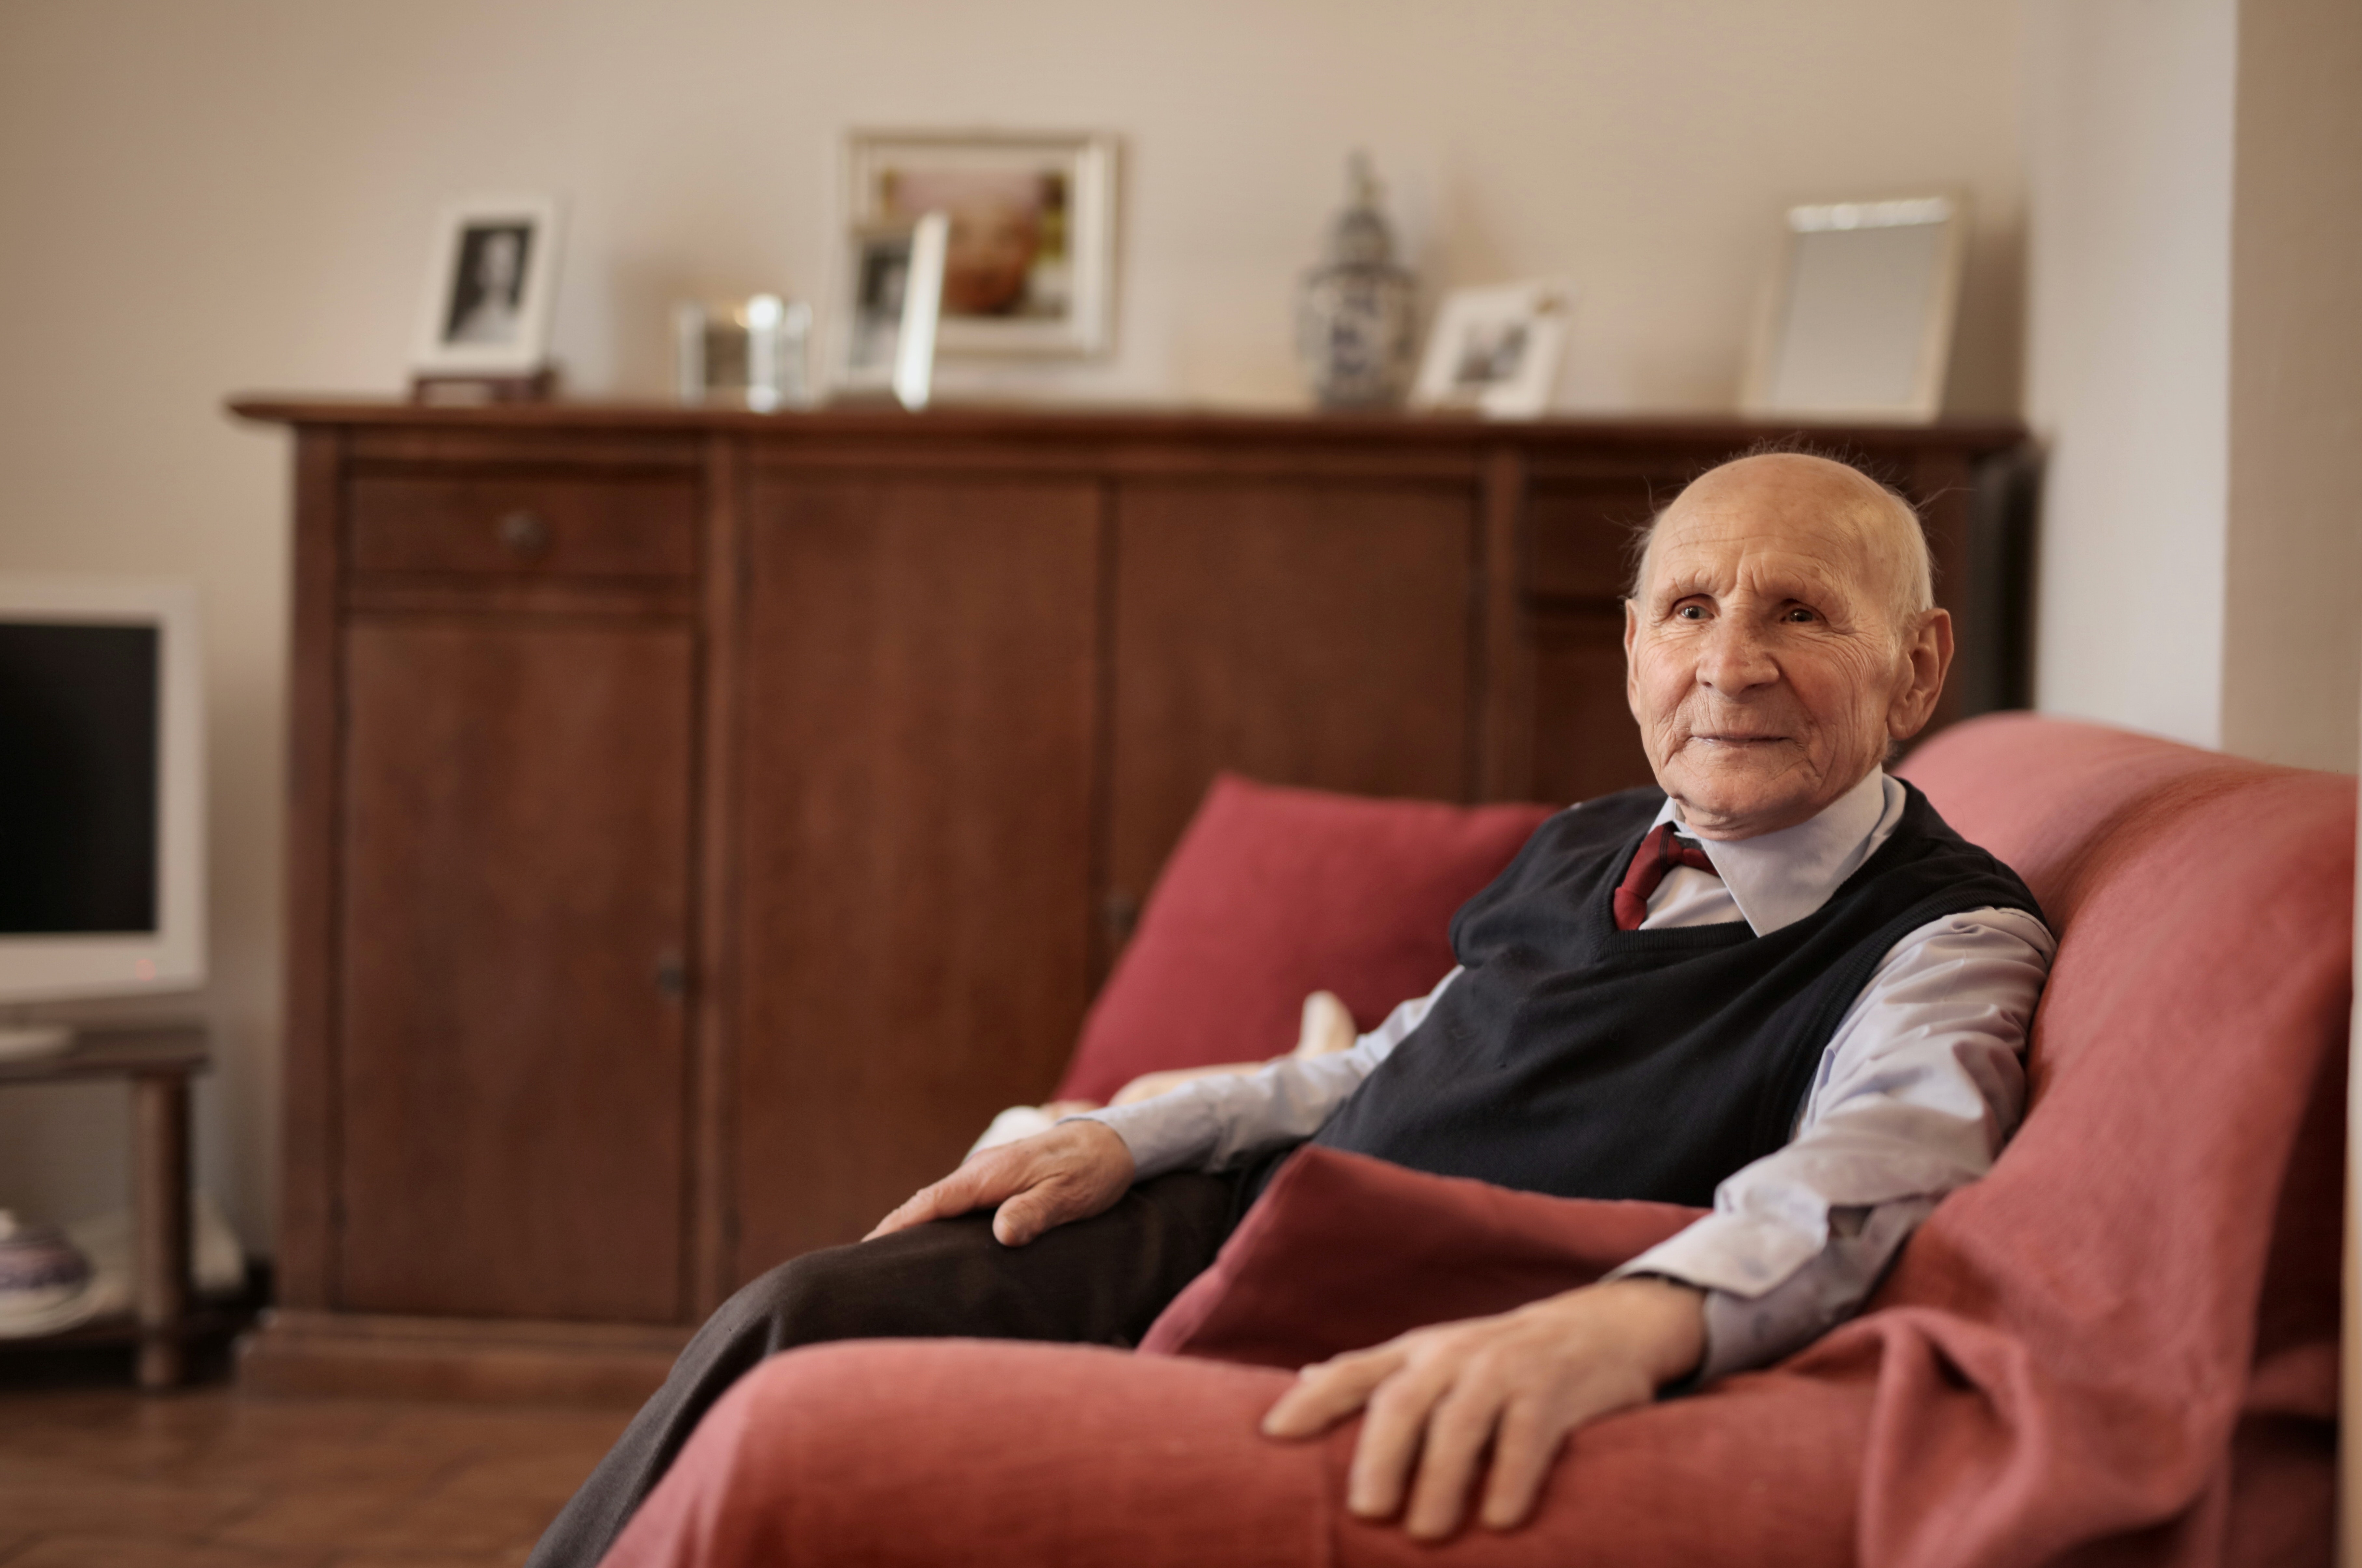 Elderly man sitting on a sofa in his home.